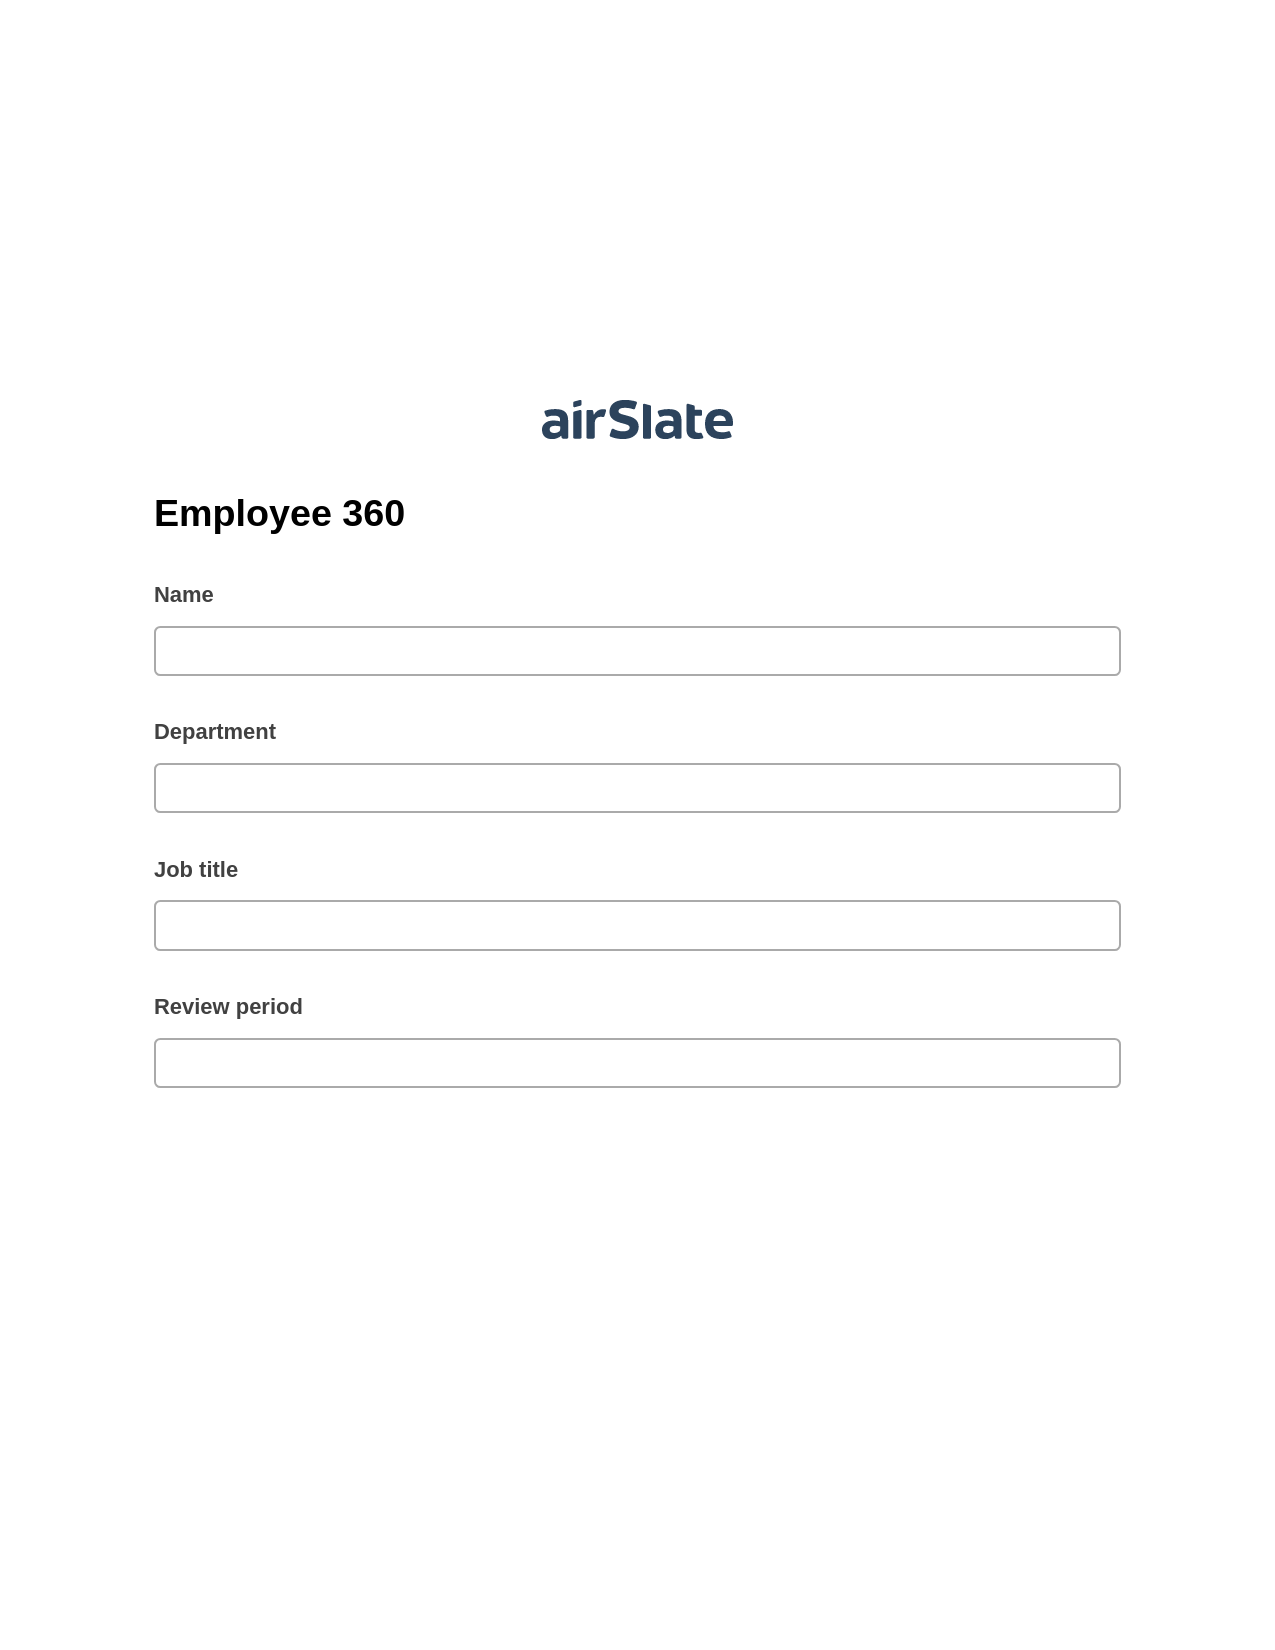 Employee 360 Pre-fill from AirTable Bot, Update MS Dynamics 365 Record Bot, Export to NetSuite Bot